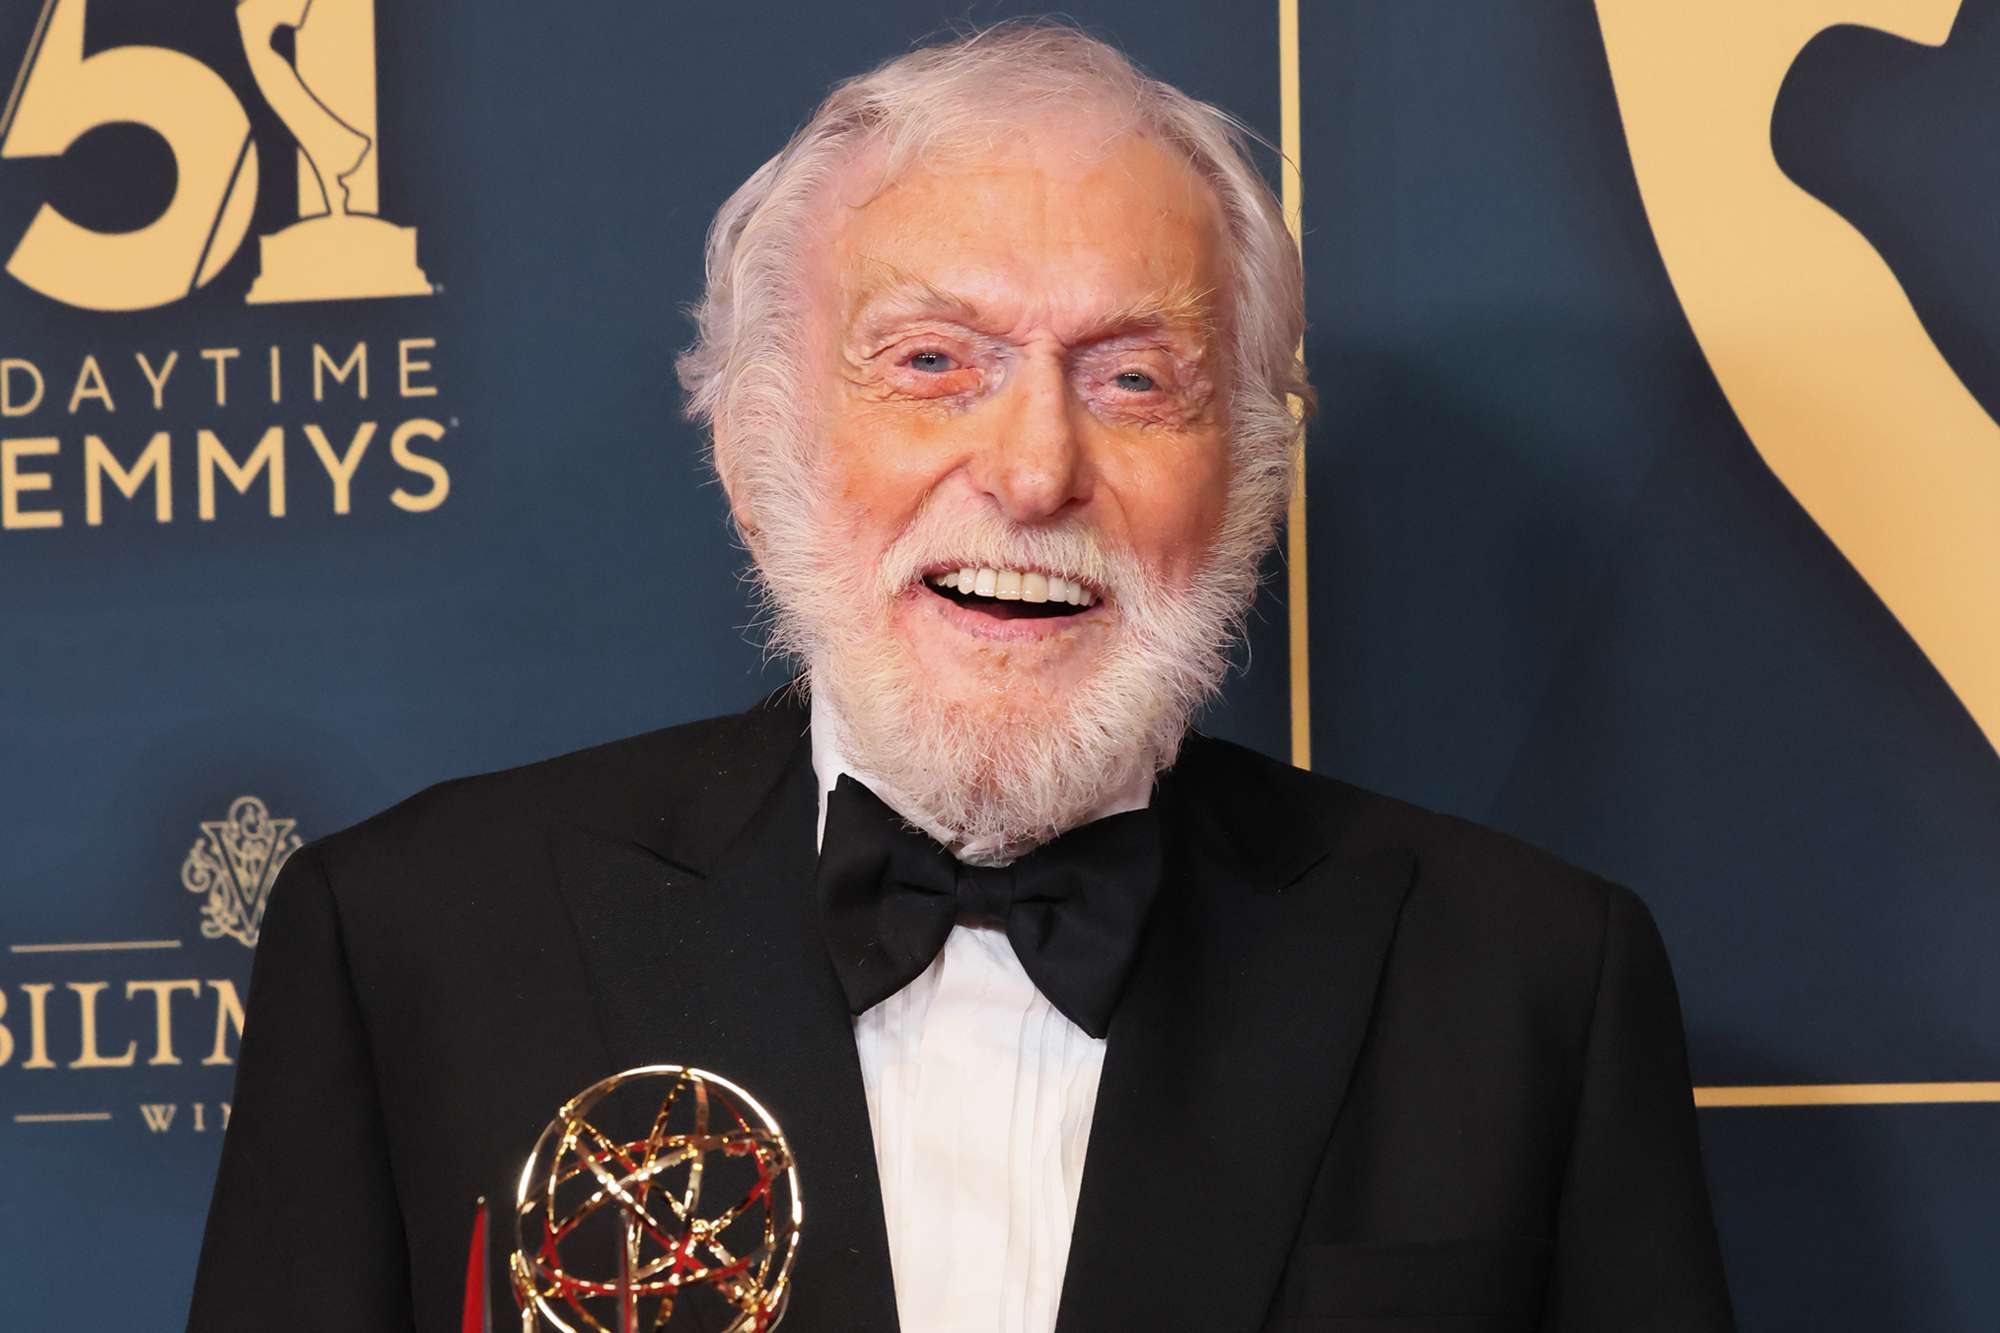 Dick Van Dyke Makes History as Oldest Daytime Emmy Winner at 98: 'This Really Tops Off a Lifetime in the Business'